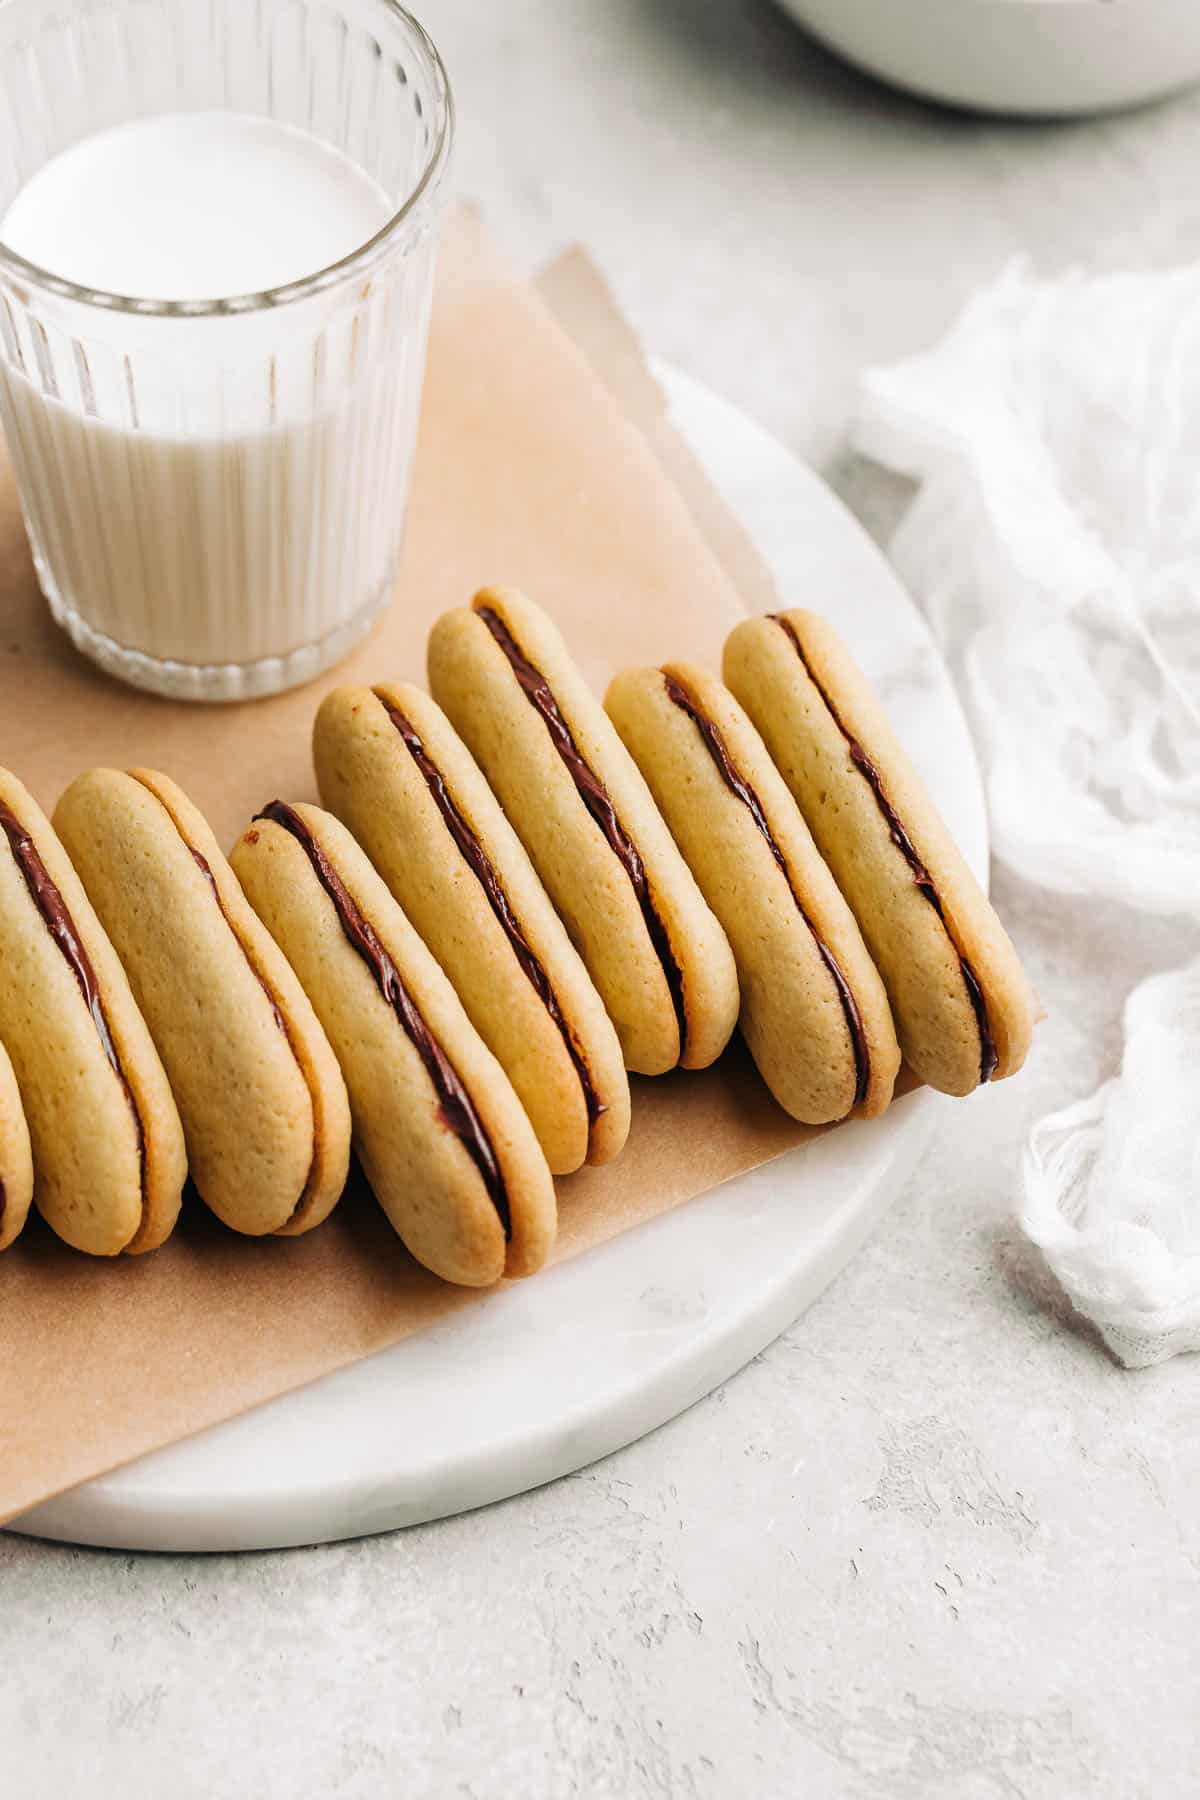 Milano cookies and a glass of milk on brown parchment paper.